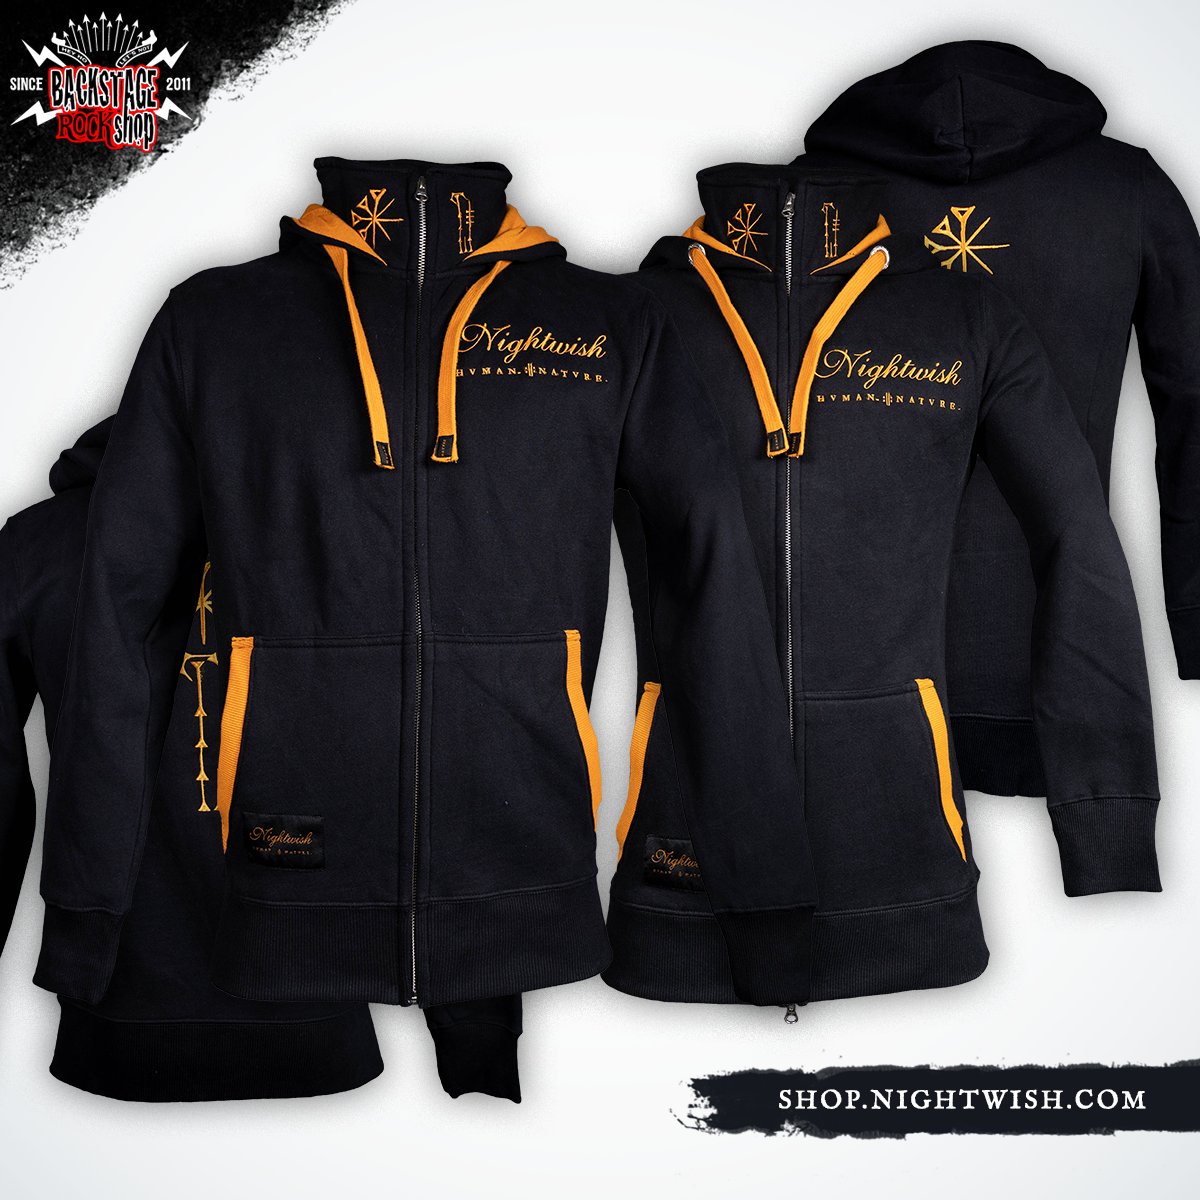 Nightwish on Twitter: "Human. :||: Nature. high collar premium zip hoodies  available now exclusively from the official Nightwish Shop! 👉🏻  https://t.co/oejDDKKo27 https://t.co/pmJFCcSCMl" / Twitter